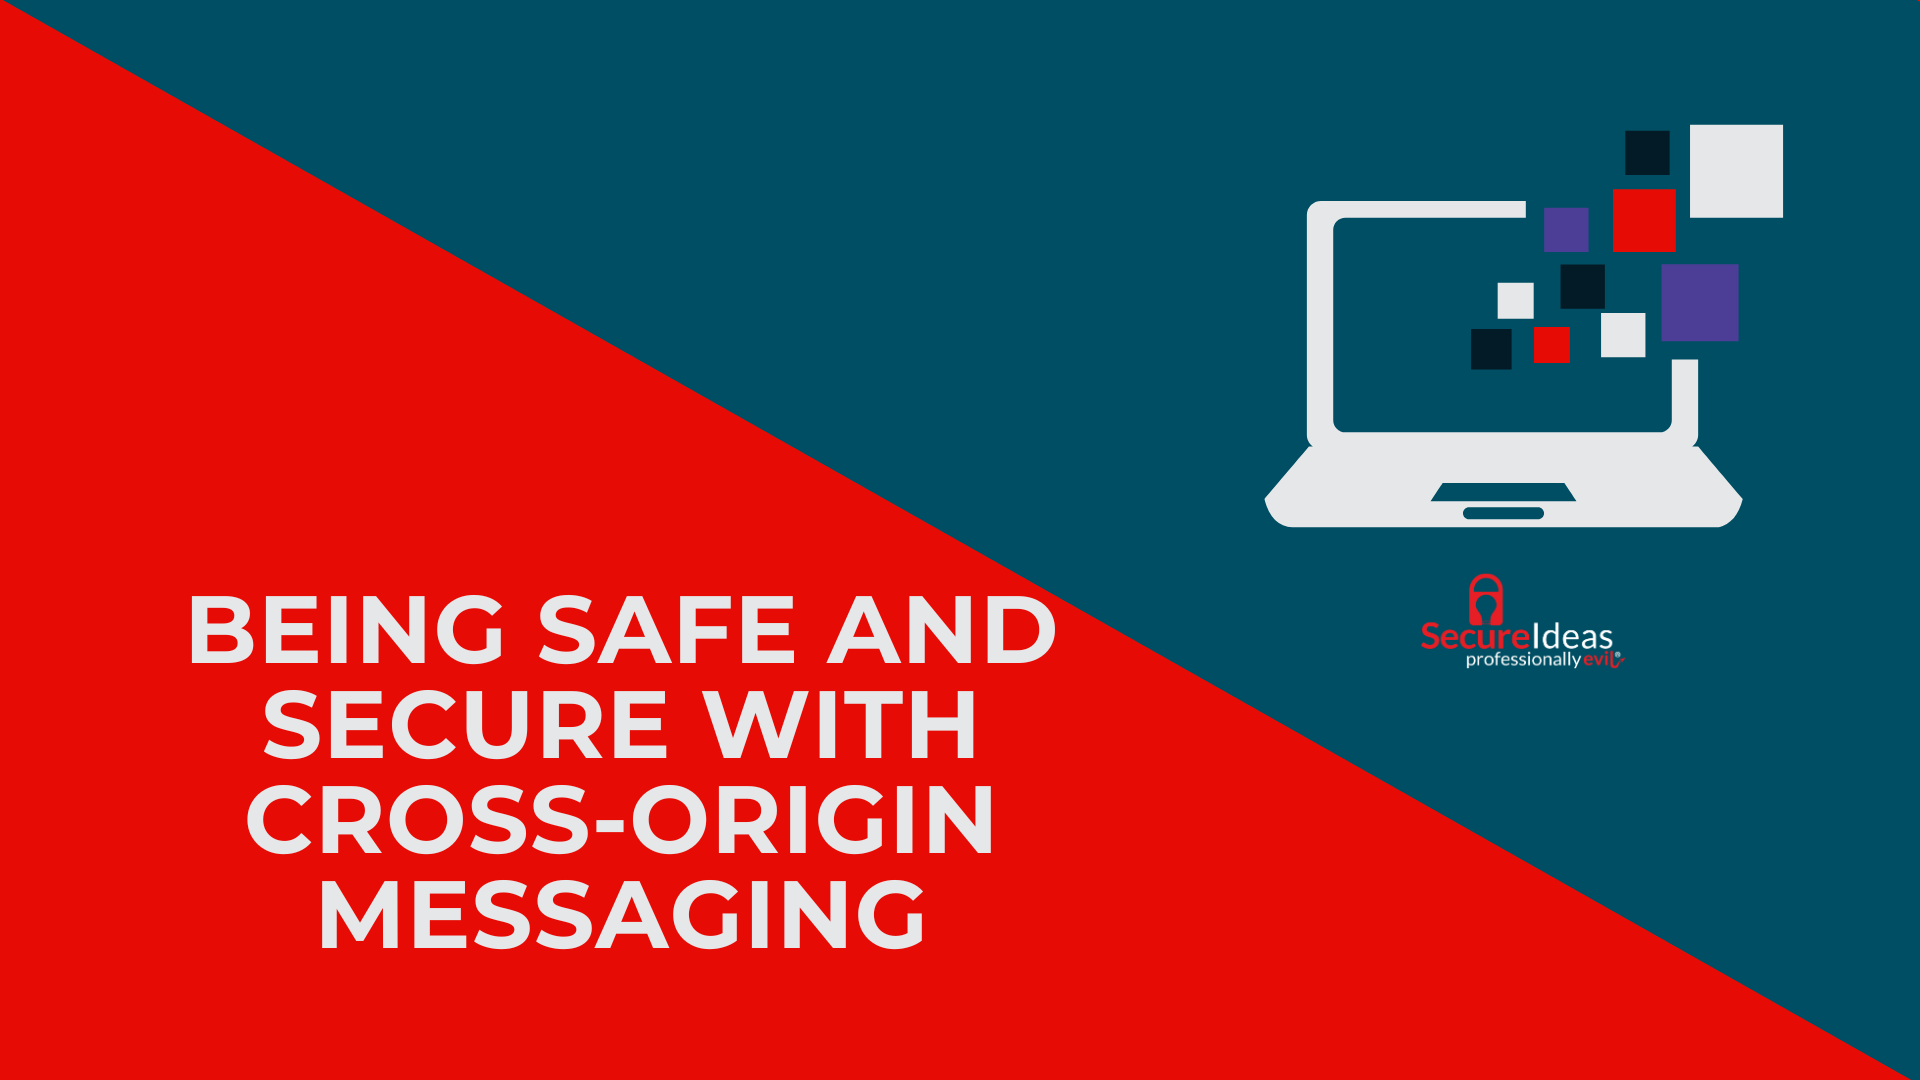 Being Safe and Secure with Cross-Origin Messaging